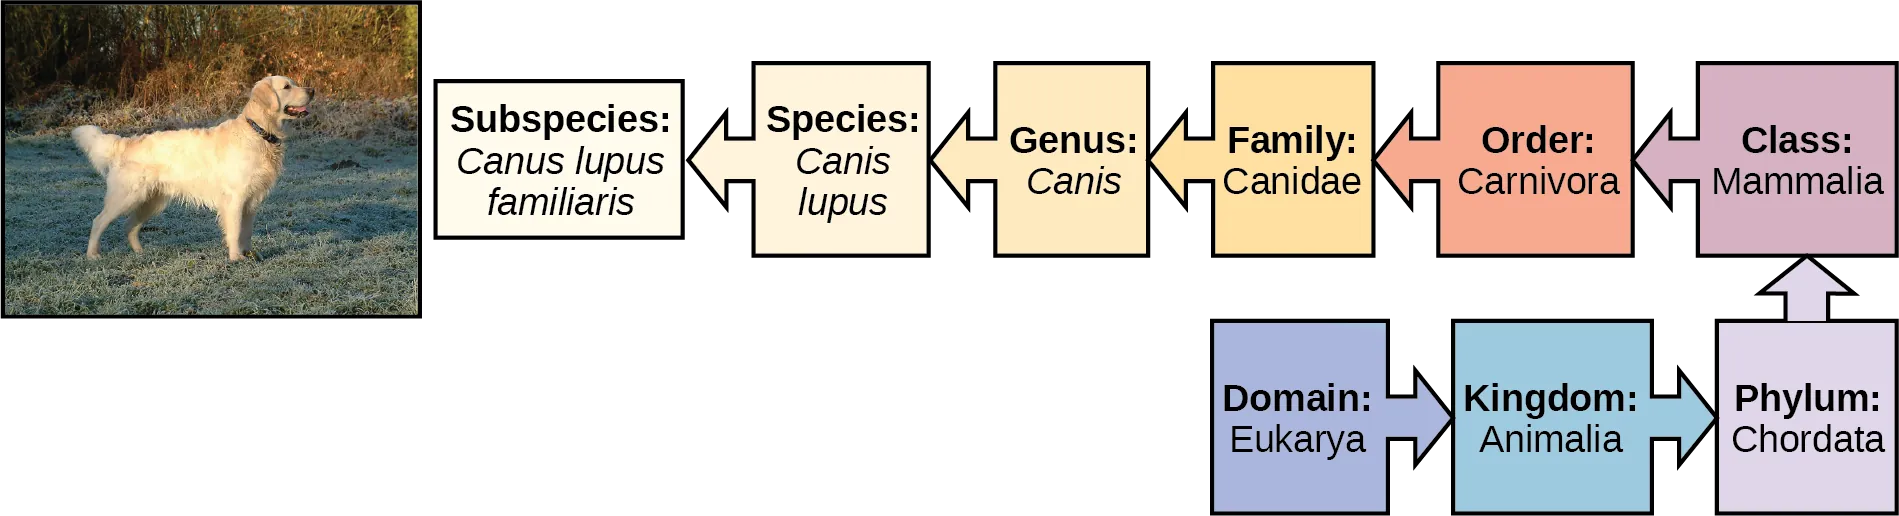 The illustration shows the classification of a dog, which belongs in the domain Eukarya, kingdom Animalia, phylum Chordata, class Mammalia, order Carnivore, family Canidae, genus Canis, species Canis lupus, and the subspecies is Canis lupus familiaris.